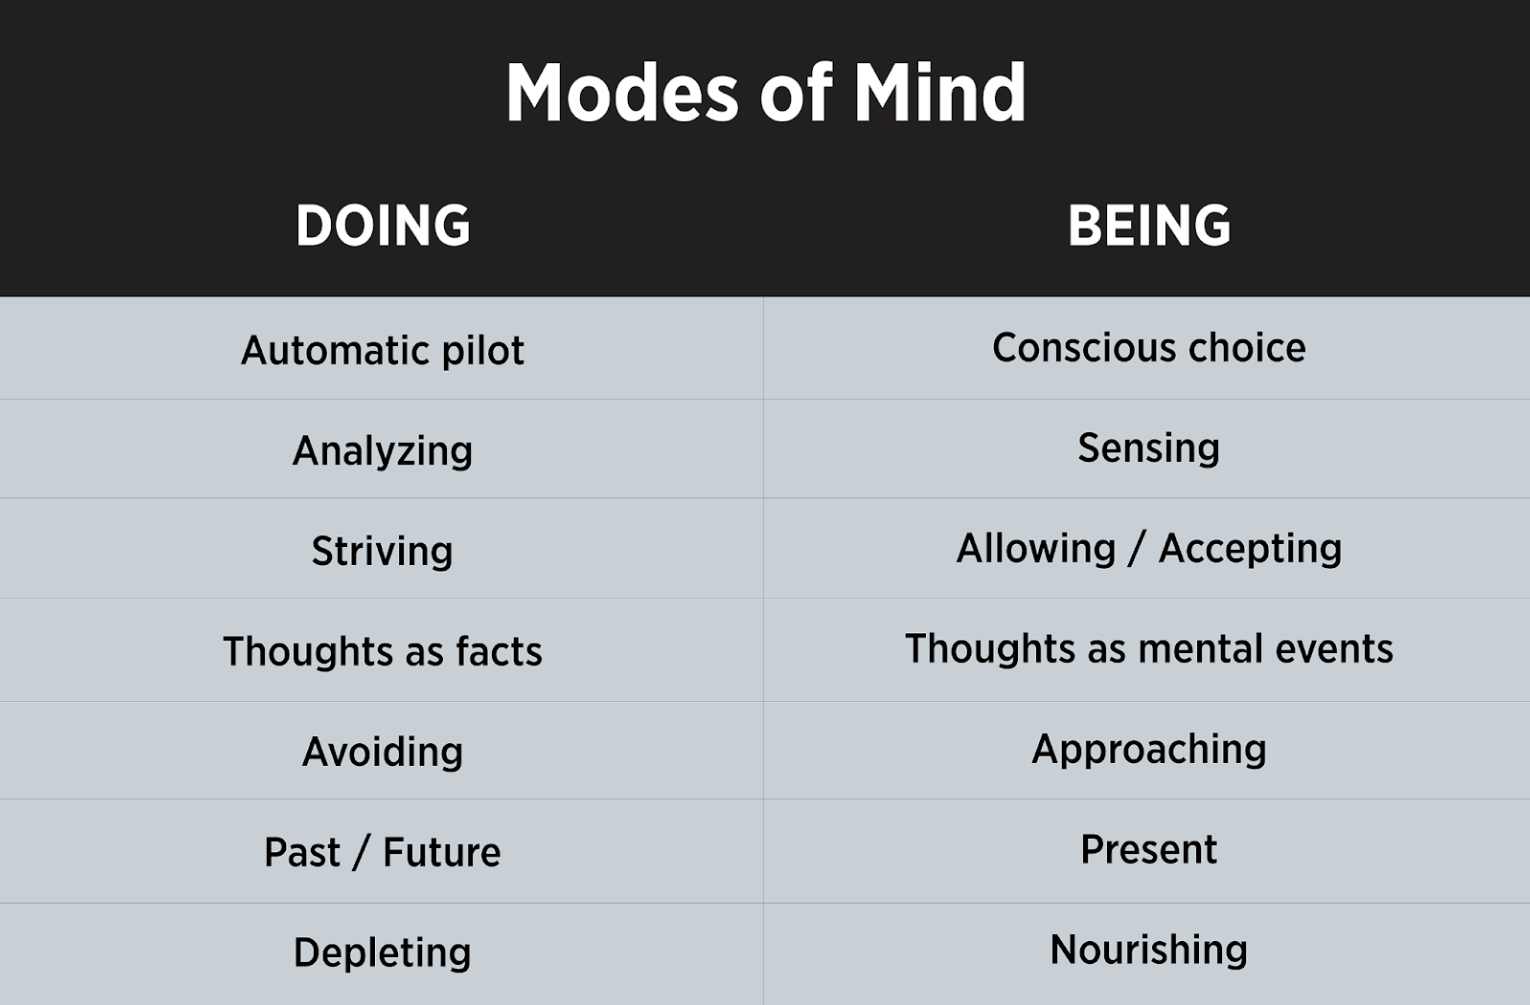 list of the modes of mind doing vs. being for mbct program